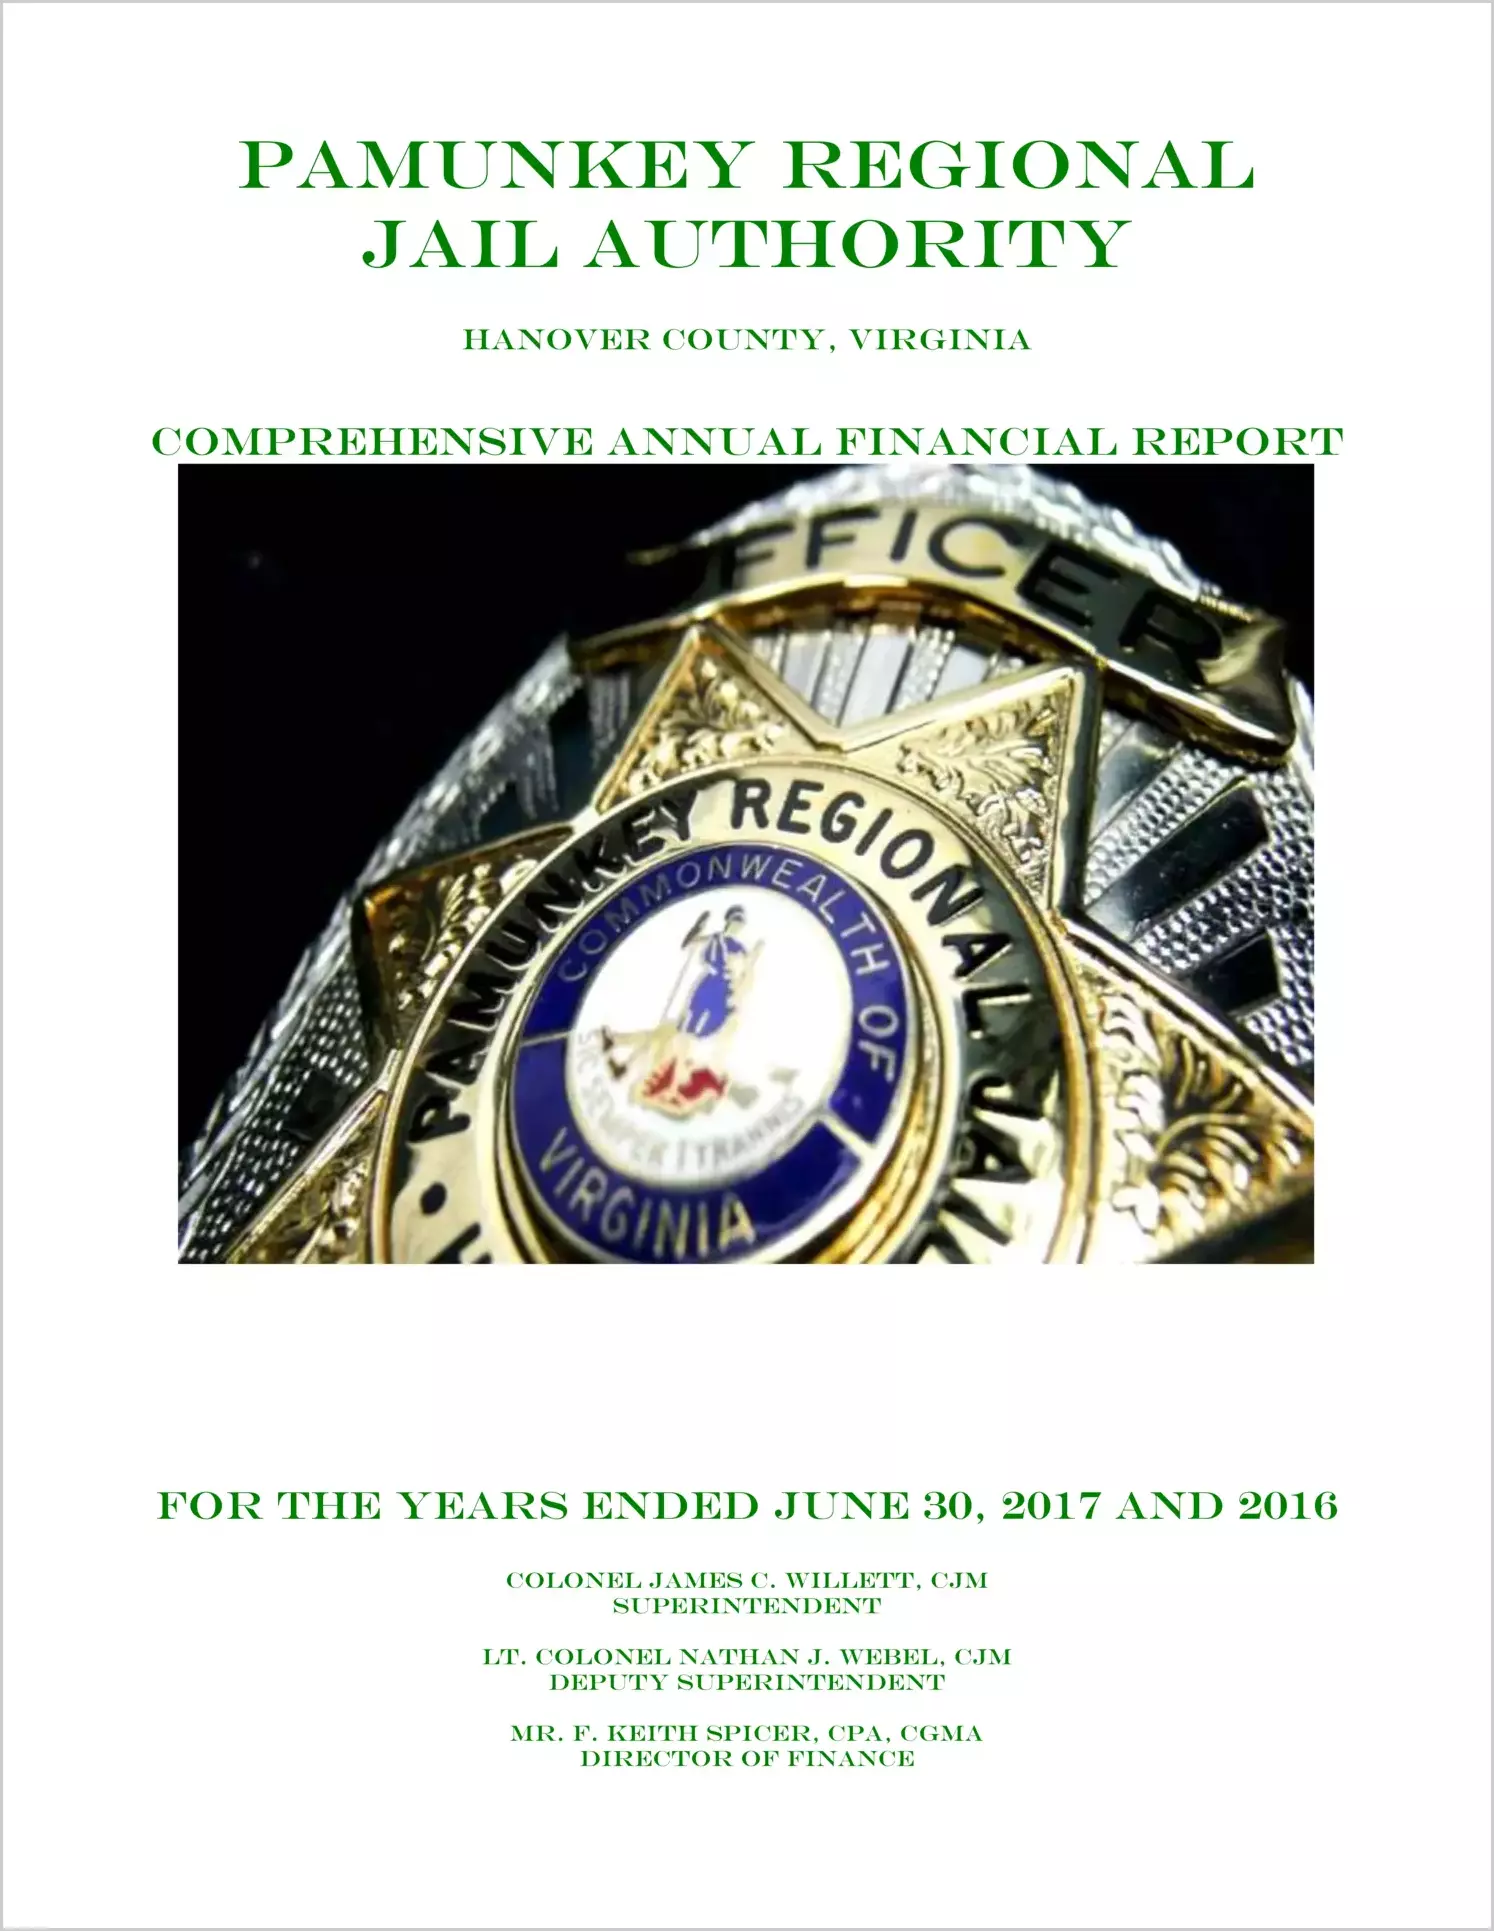 2017 ABC/Other Annual Financial Report  for Pamunkey Regional Jail Authority